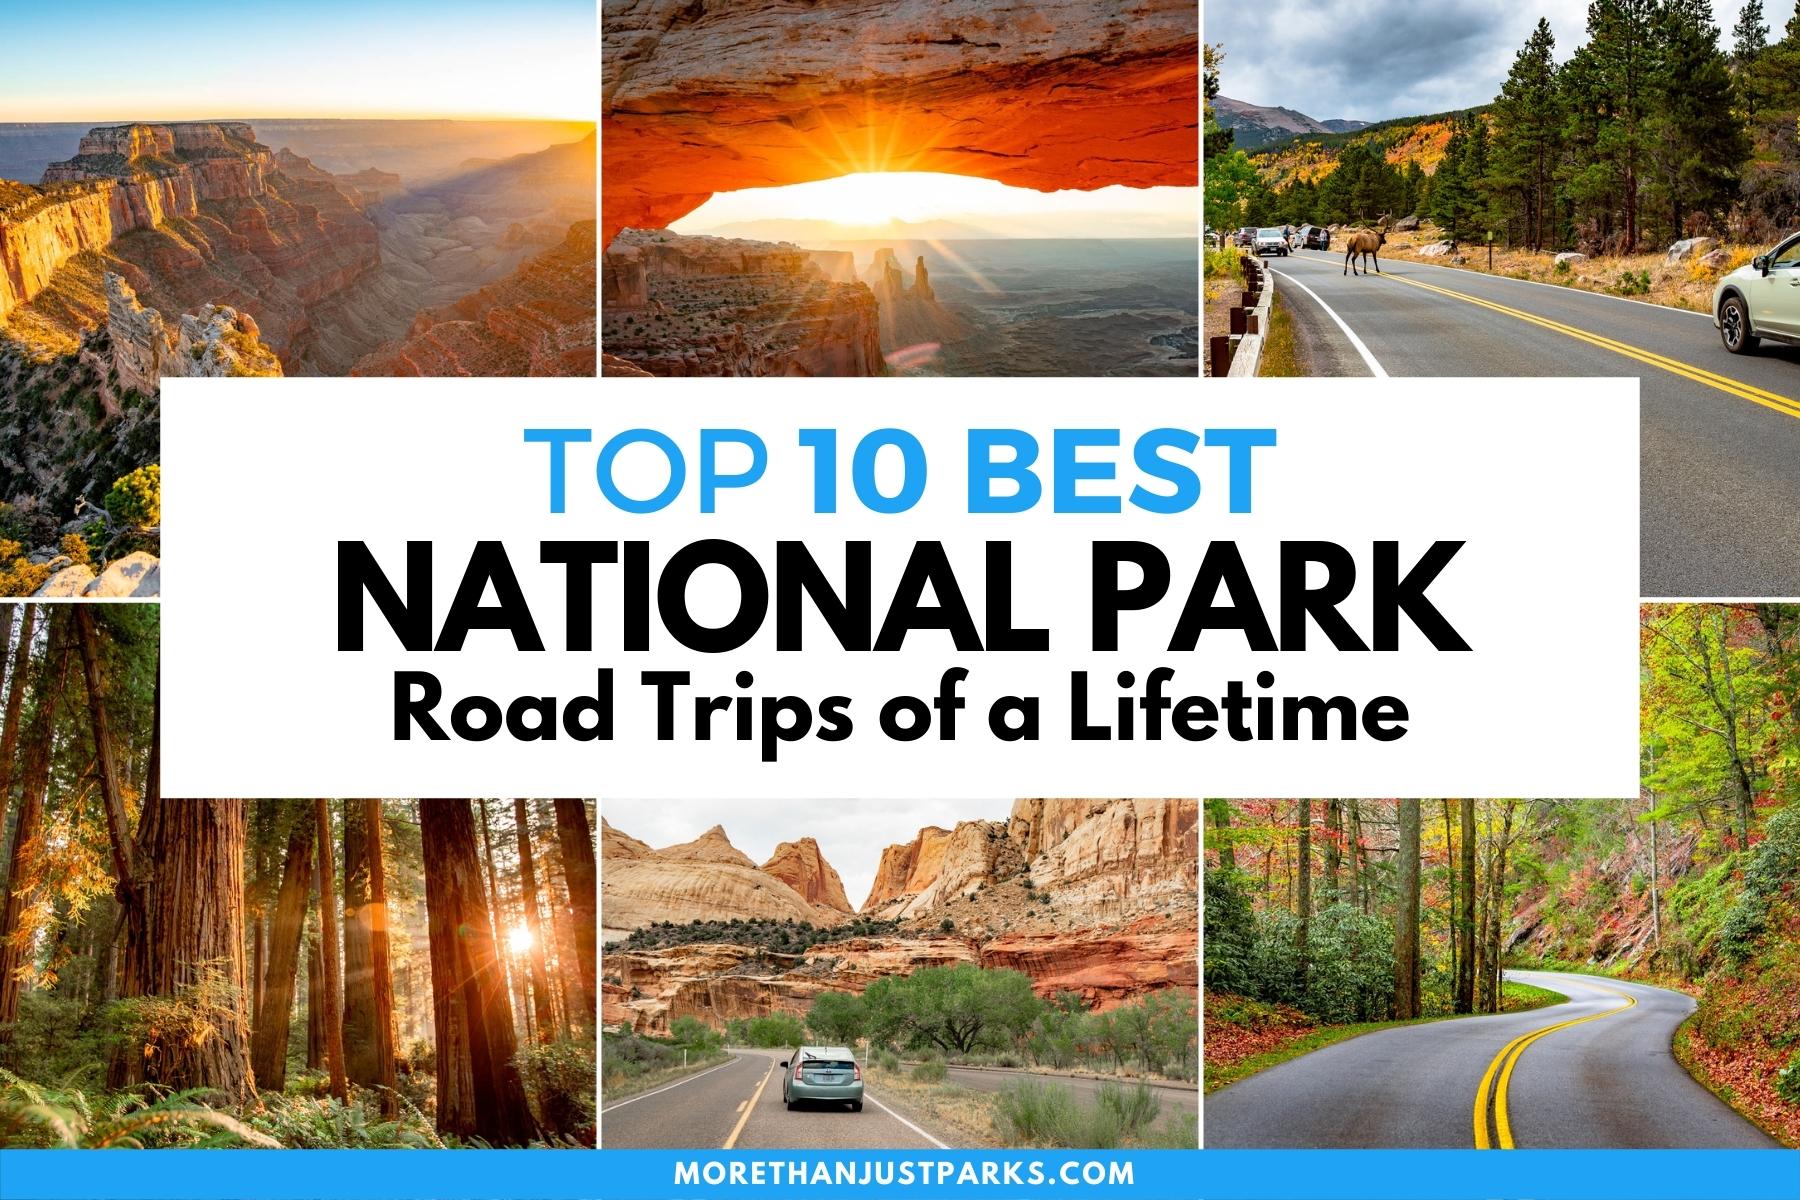 Maximize Your Adventure: Road Trip Planner With Stops